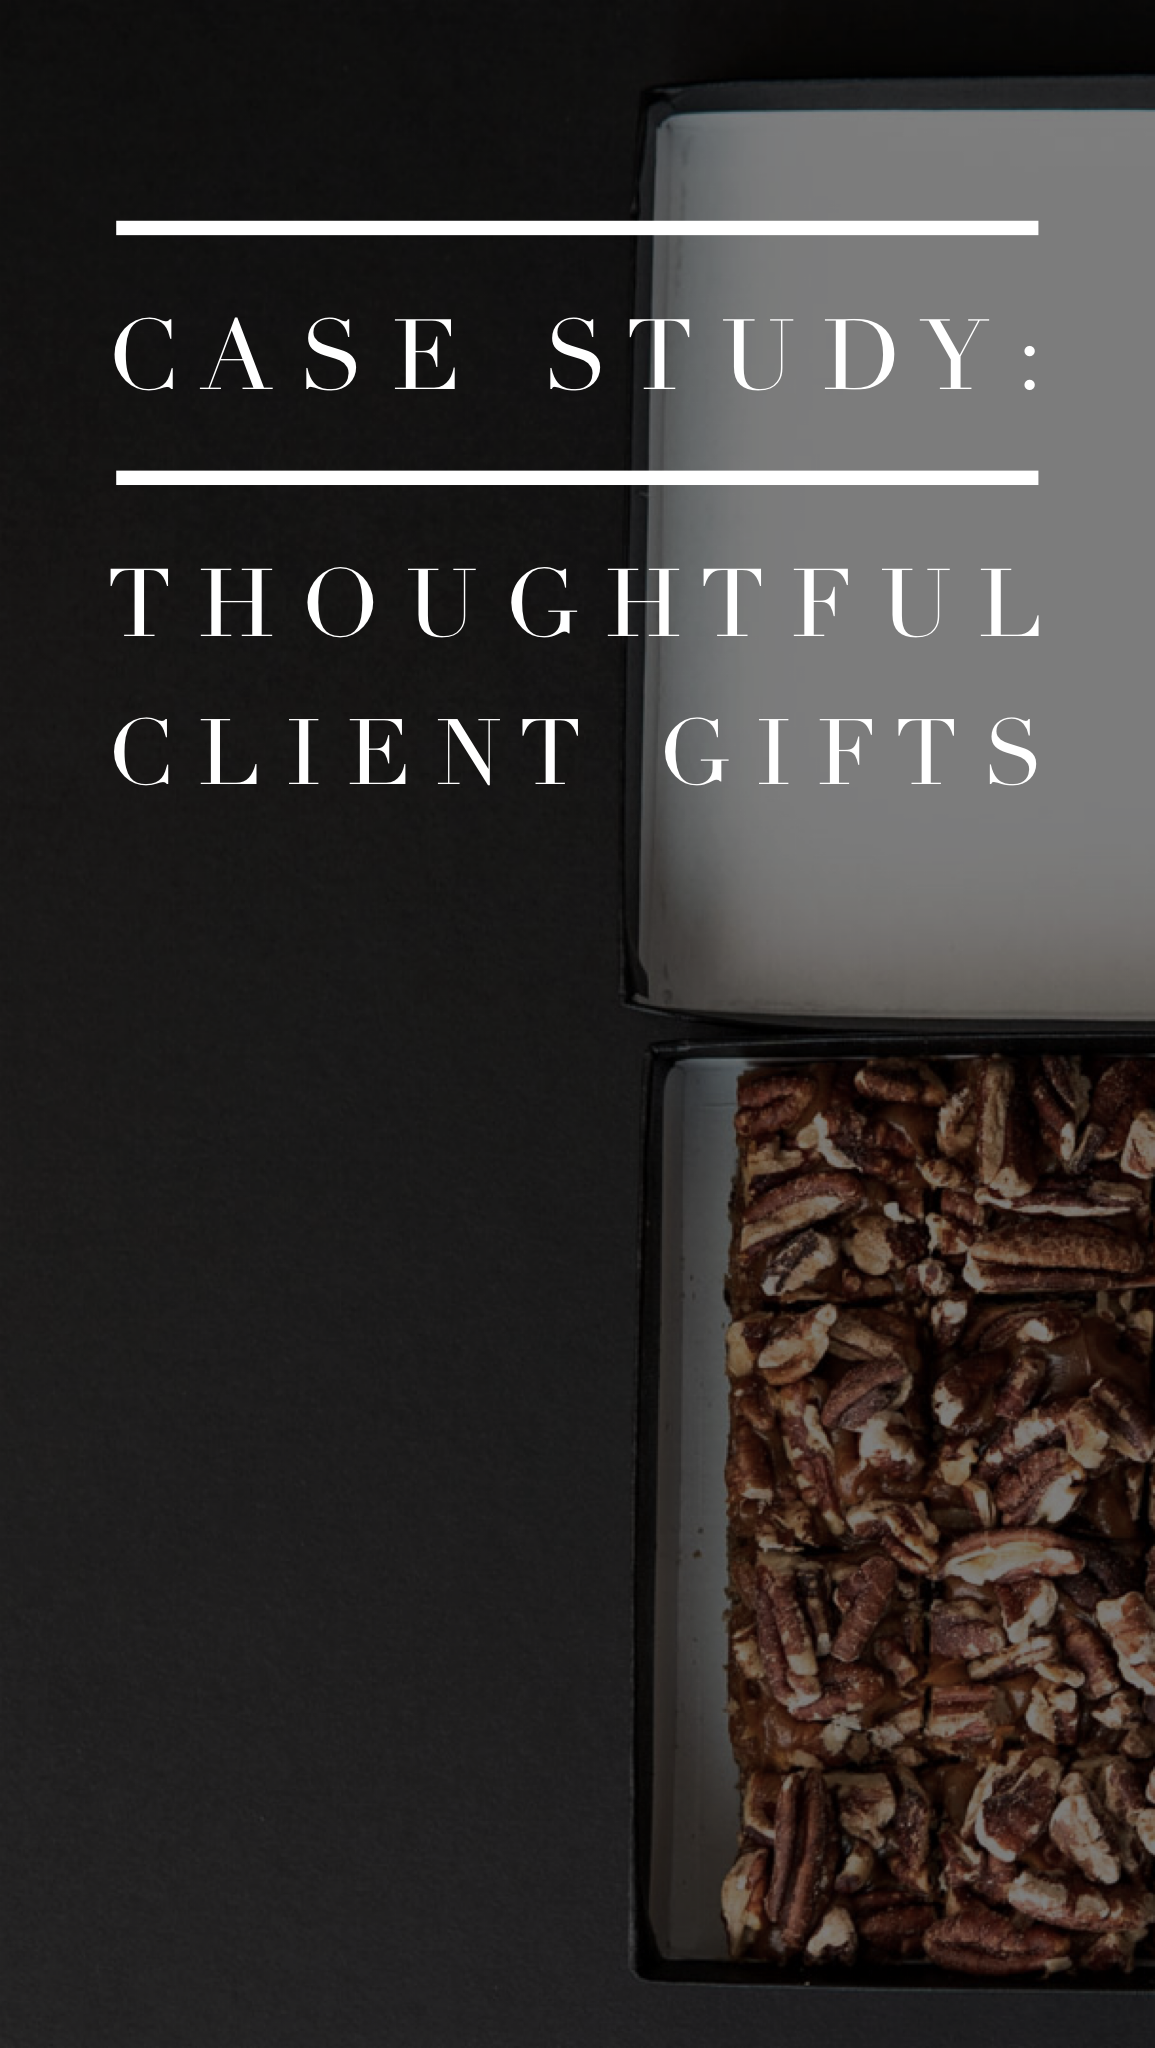 Case Study: Thoughtful client gifting